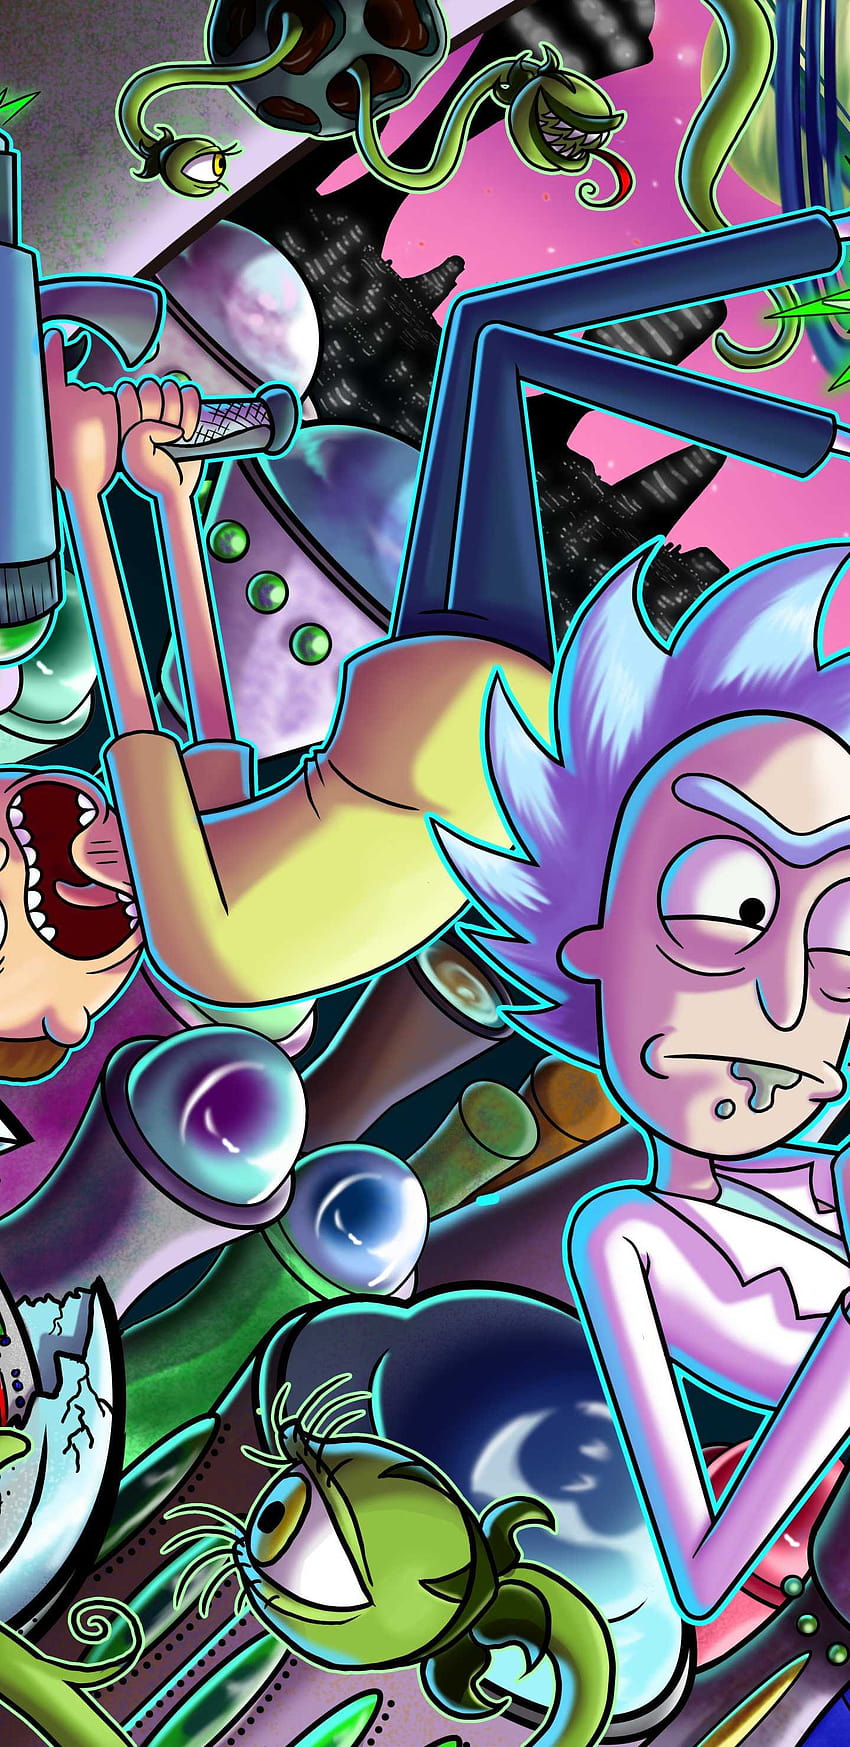 Steam Workshoprick and morty portal wallpaper